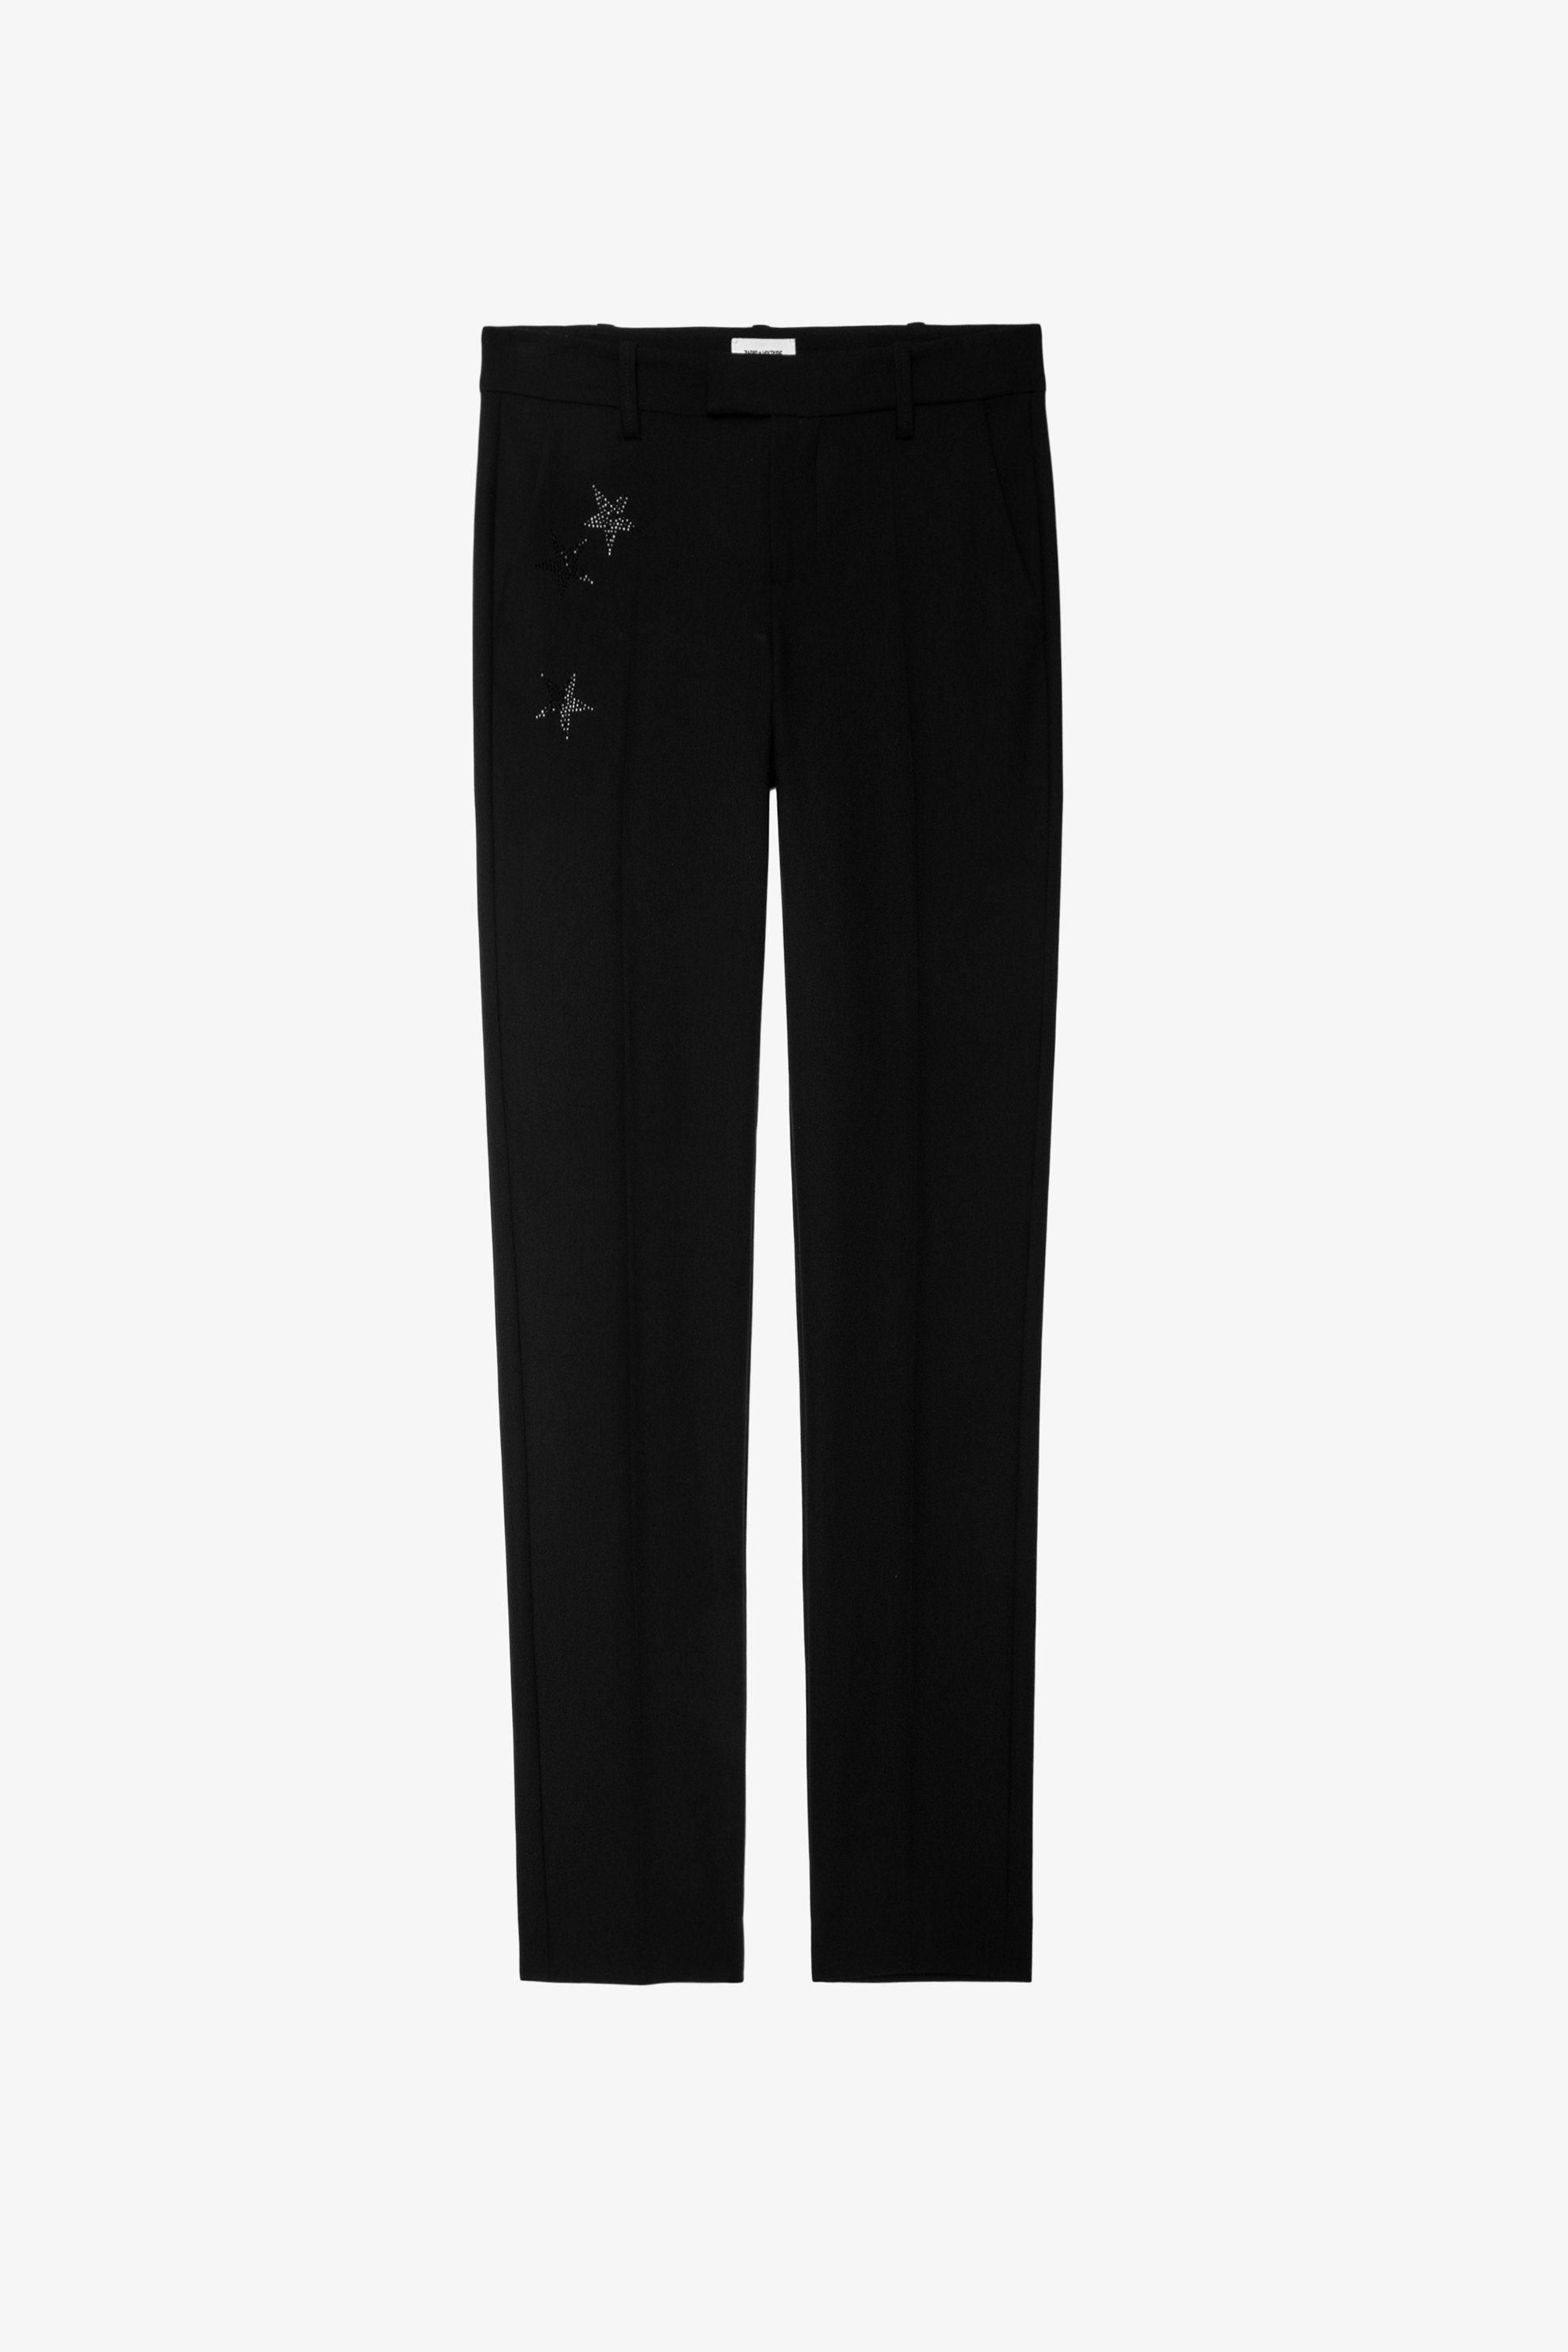 Prune Strass Star パンツ - Woman’s Zadig&Voltaire black suit trousers with rhinestone stars on the pocket.